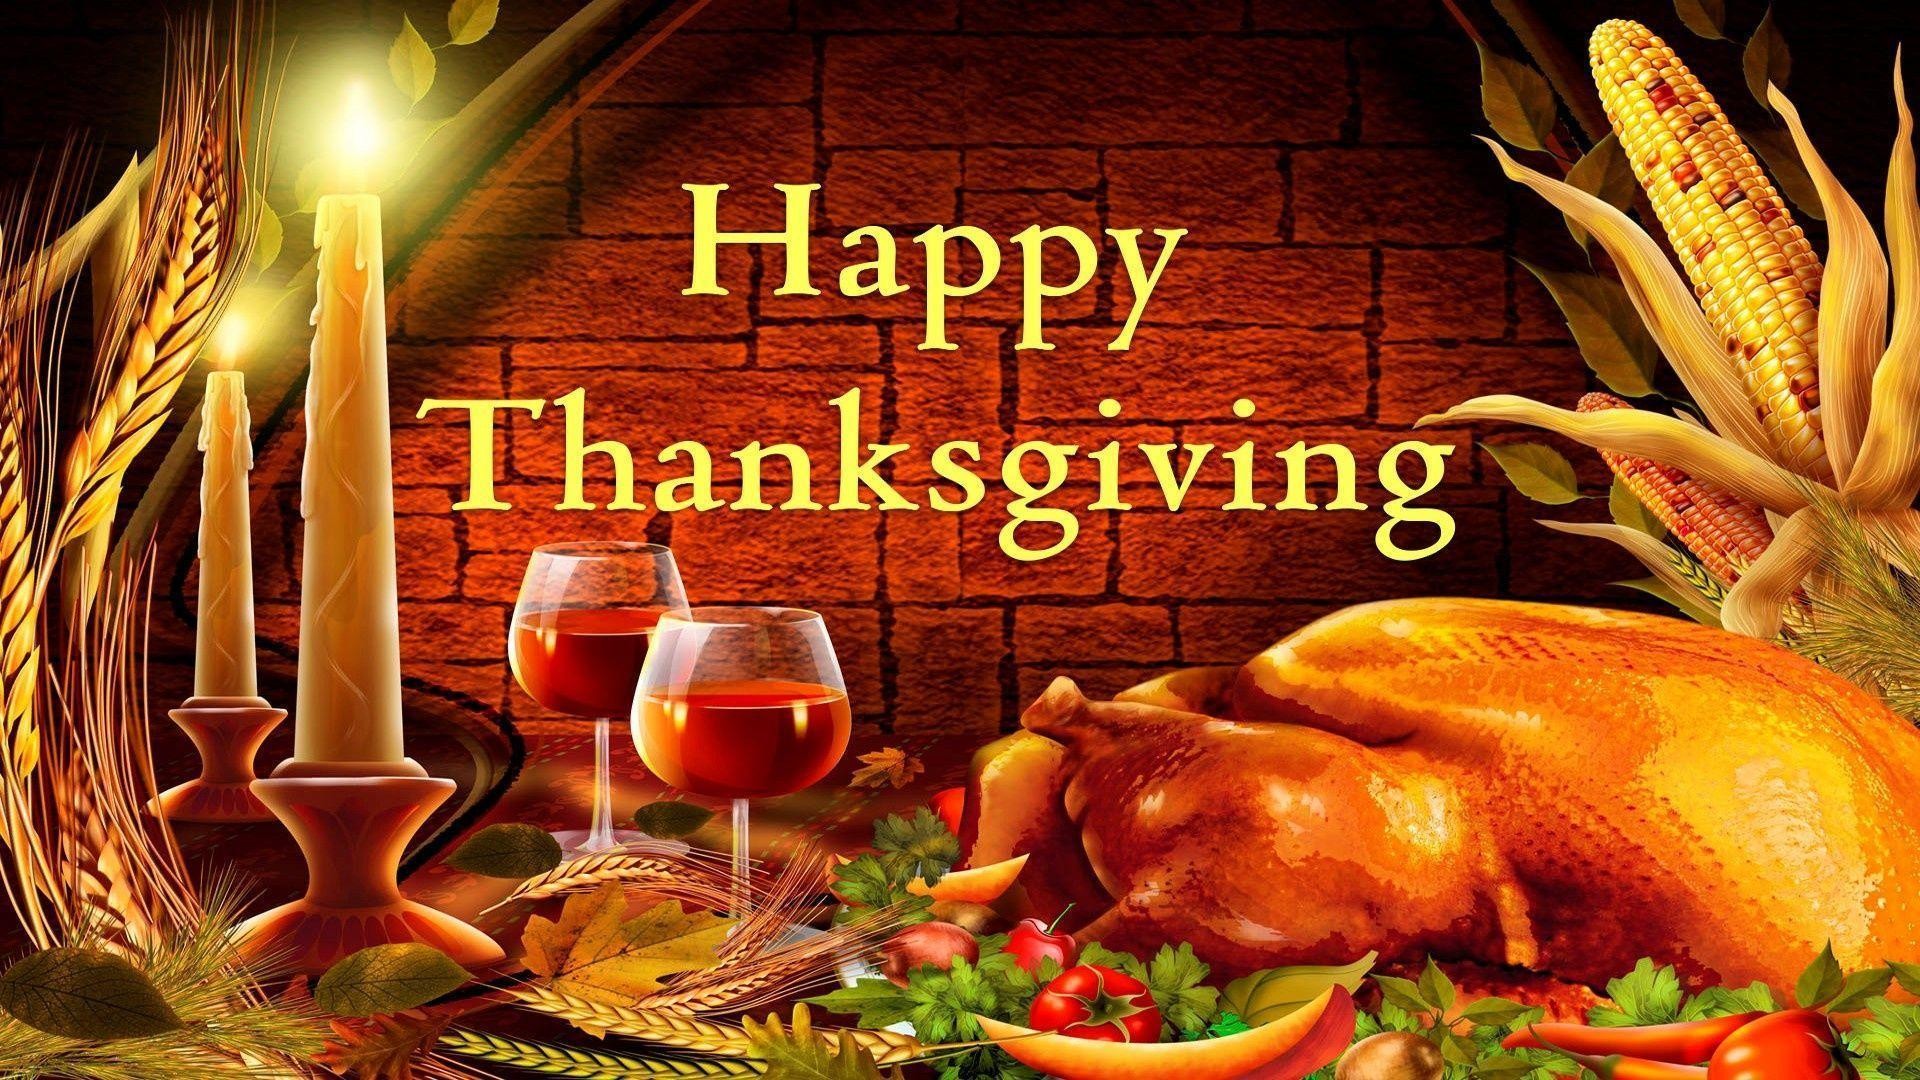 Happy Thanksgiving Images - Happy Thanksgiving - HD Wallpaper 